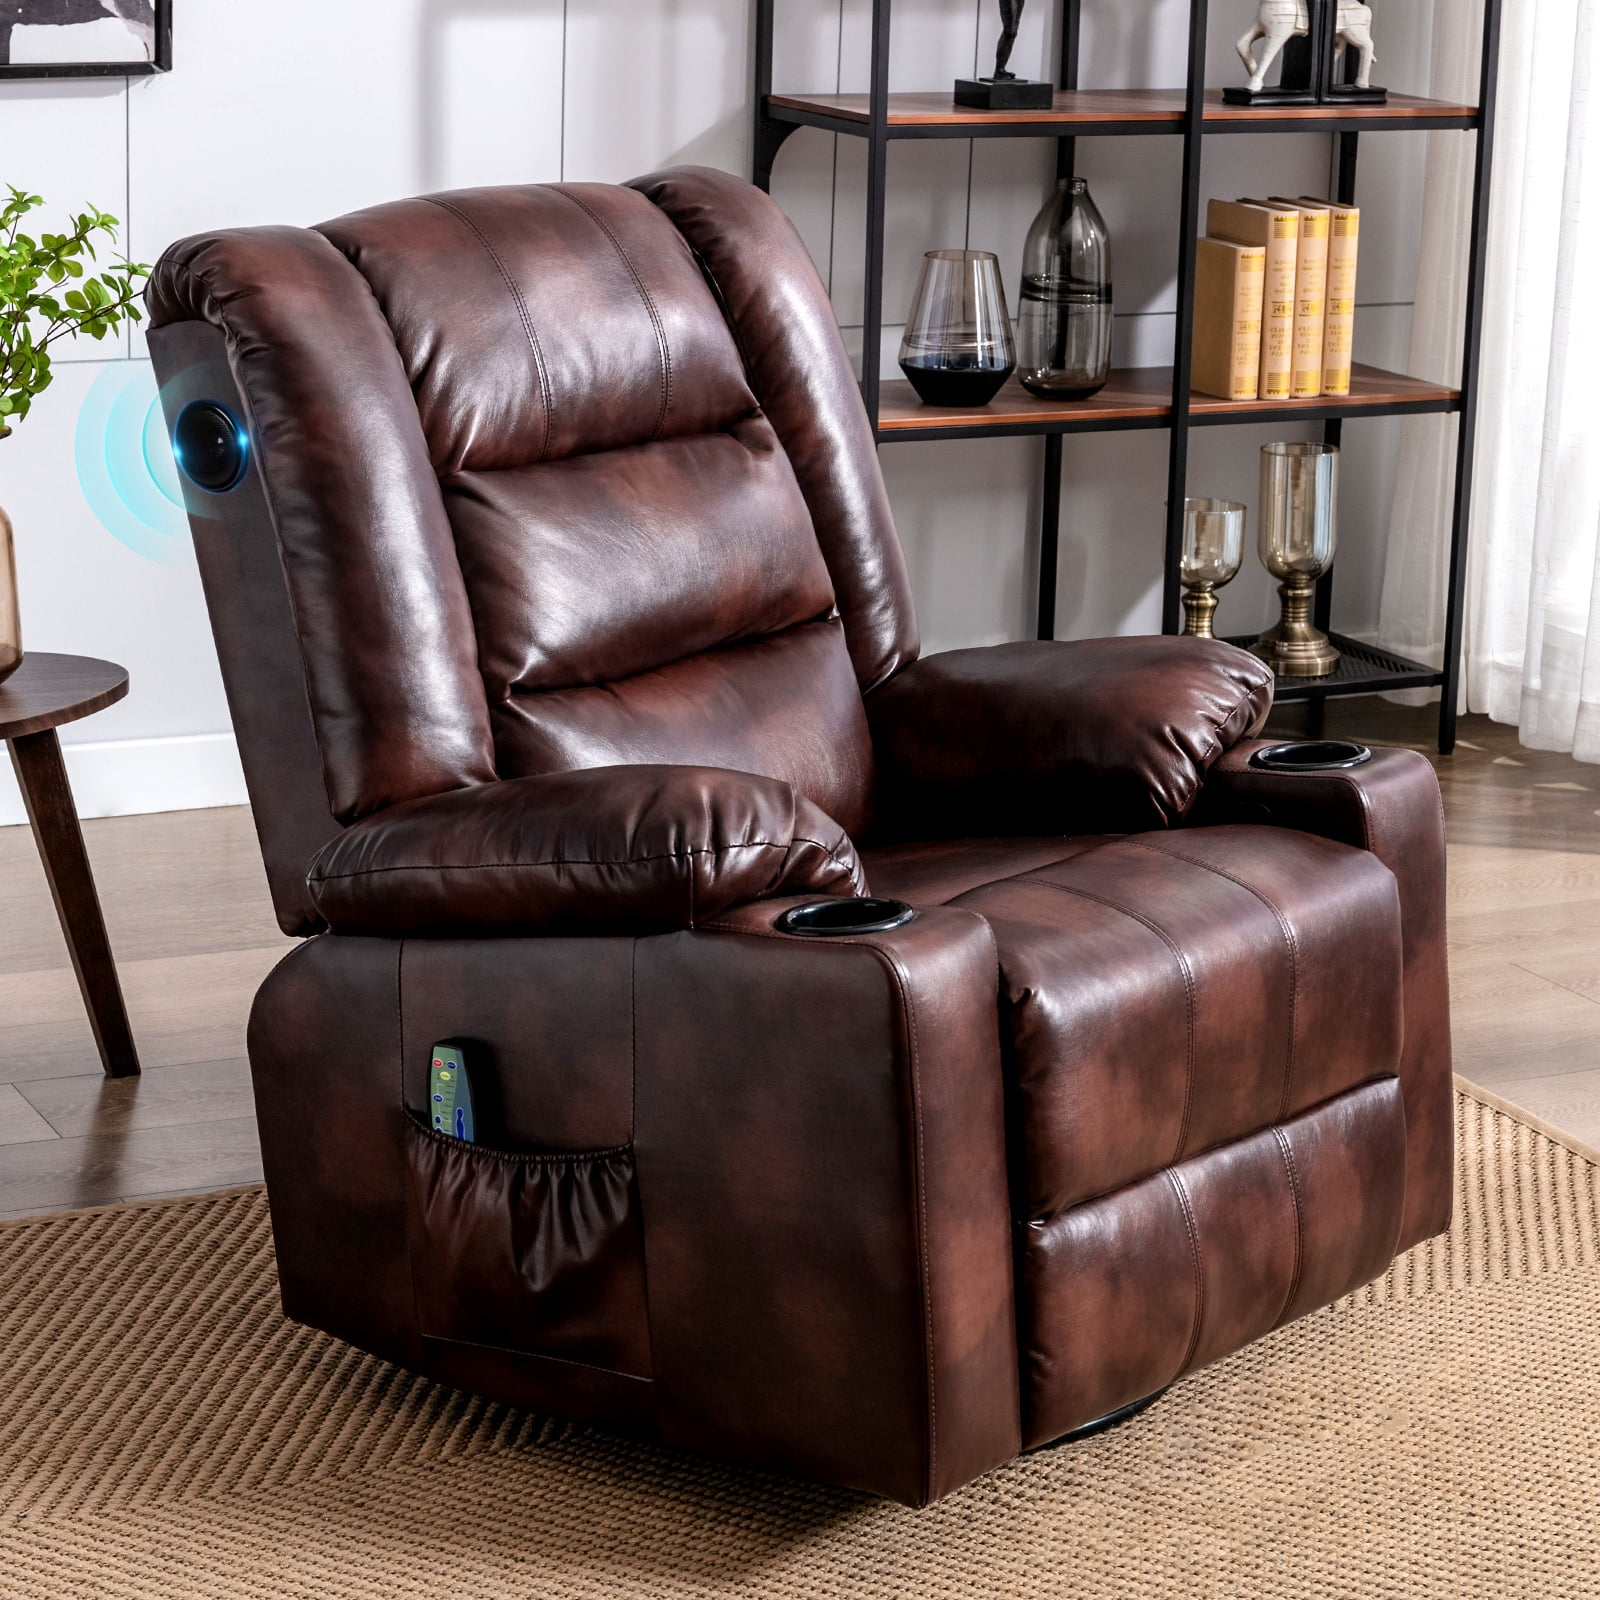 Glider Rocker Recliner Chair Breathable PU Leather Sofa Padded Seat Black Brown 